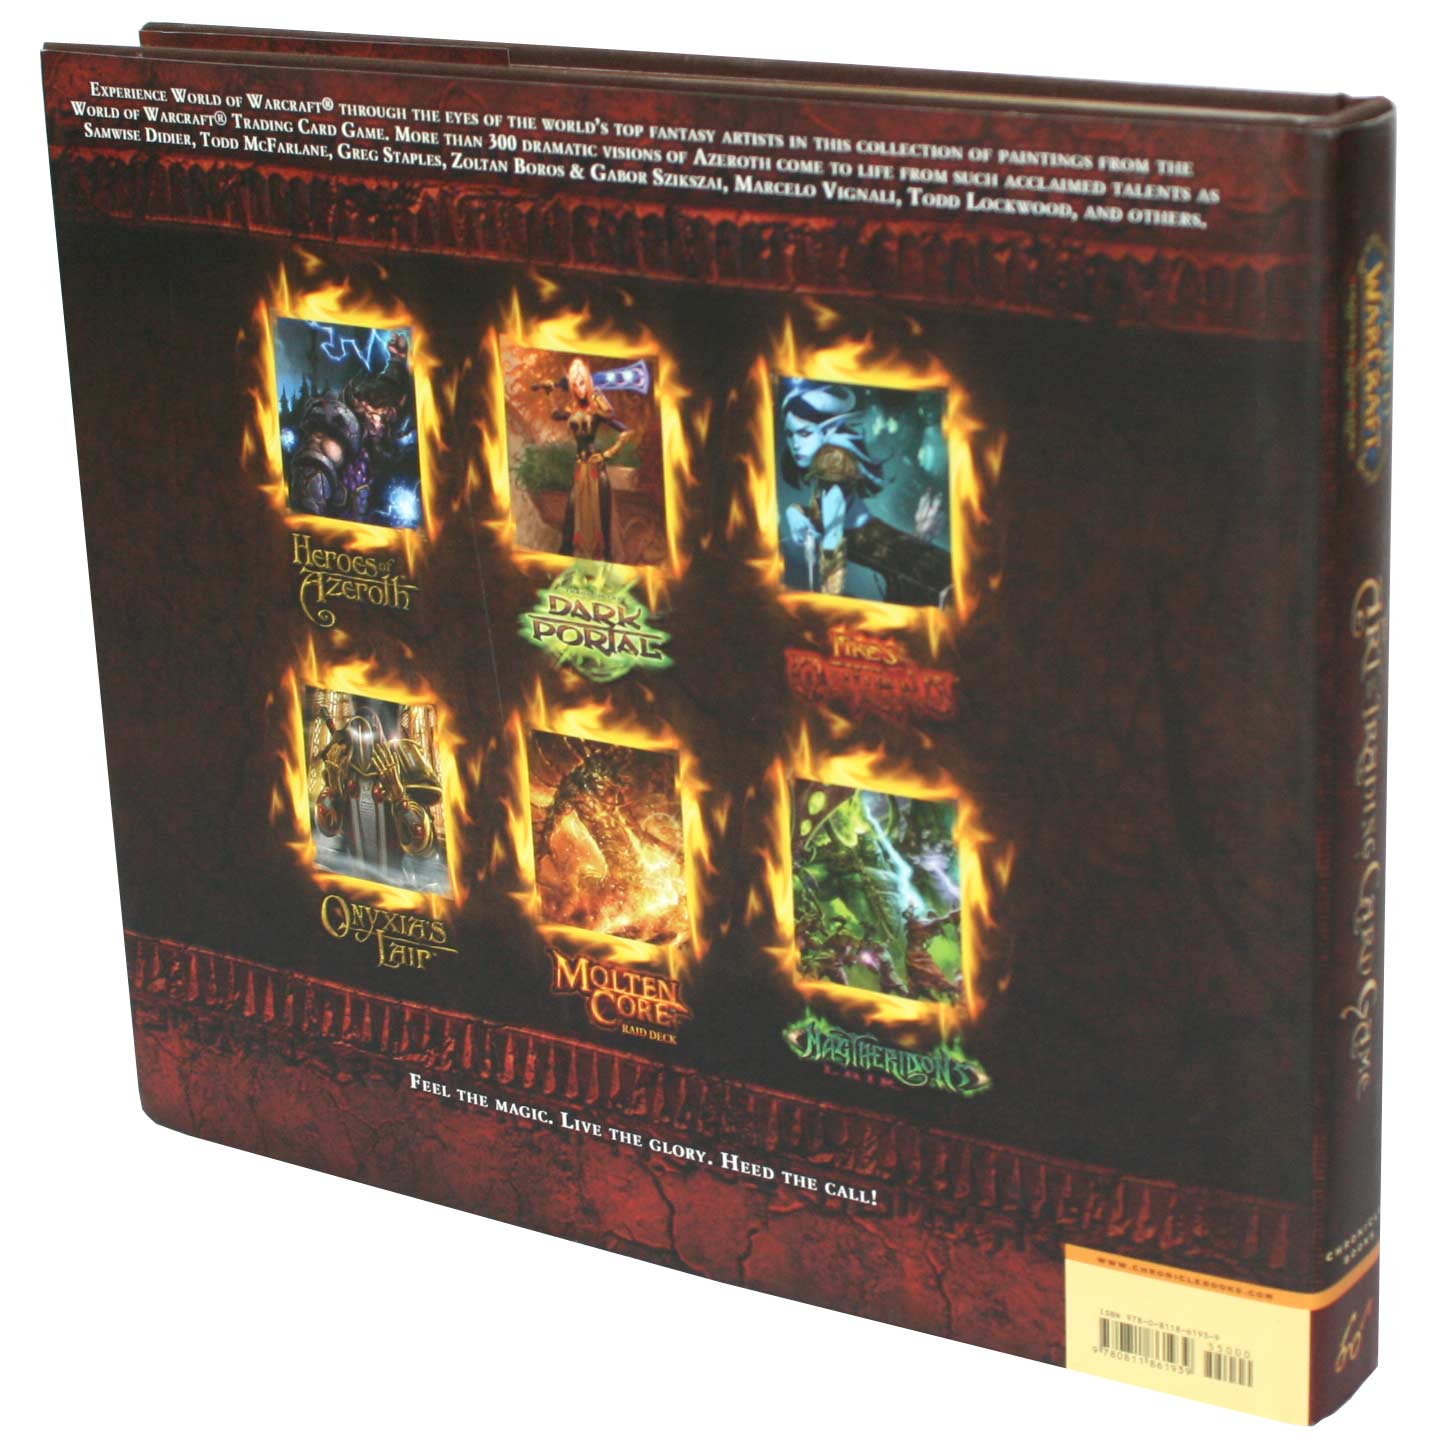 World of Warcraft : The Art of the Trading Card Game (Art book) - dos de couverture